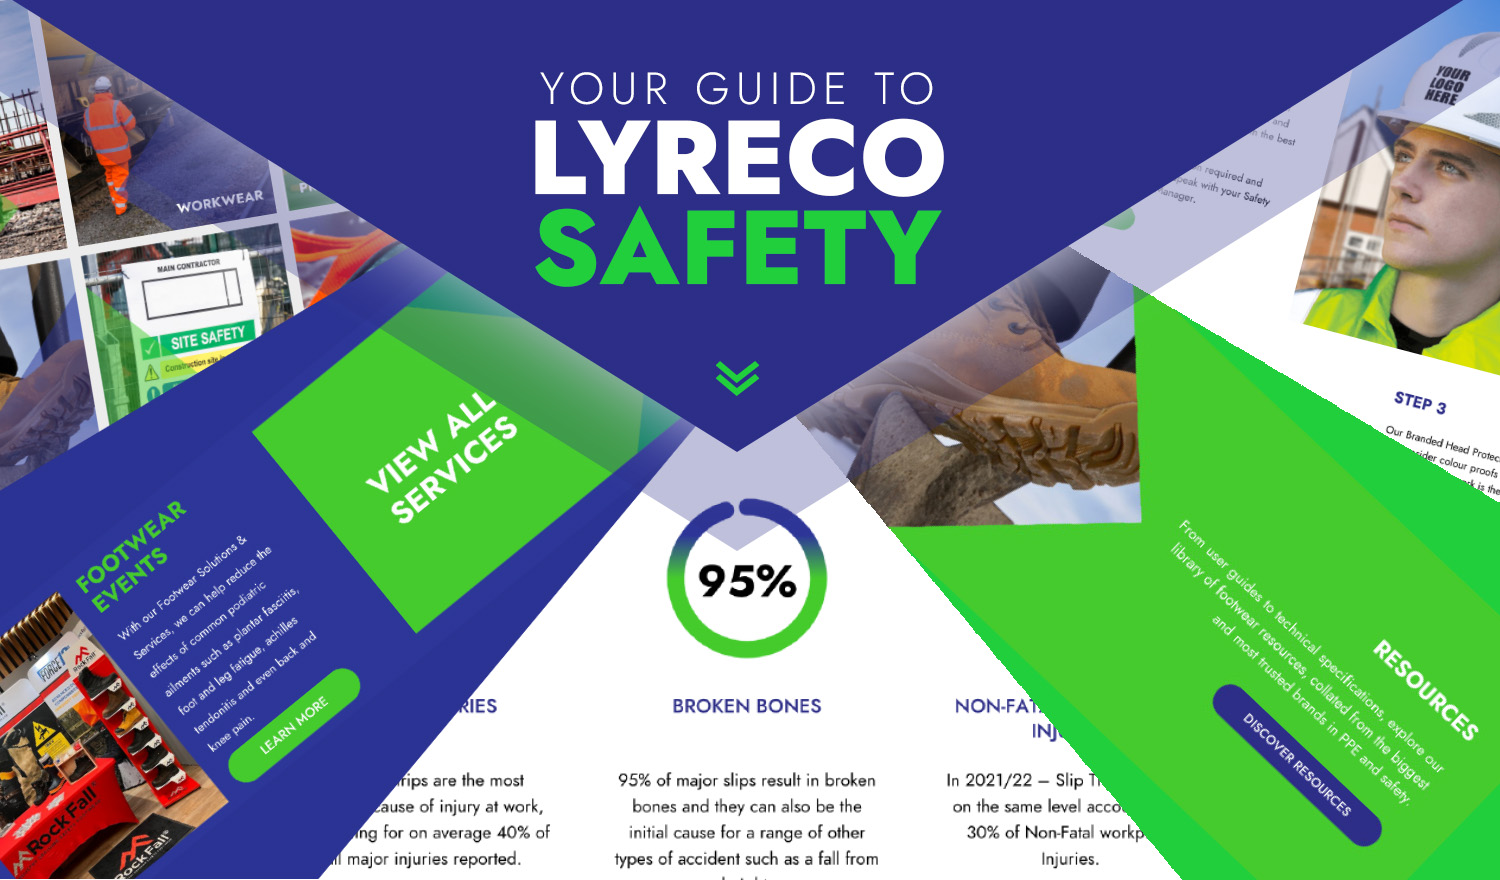 A Guided Tour to Lyreco Safety